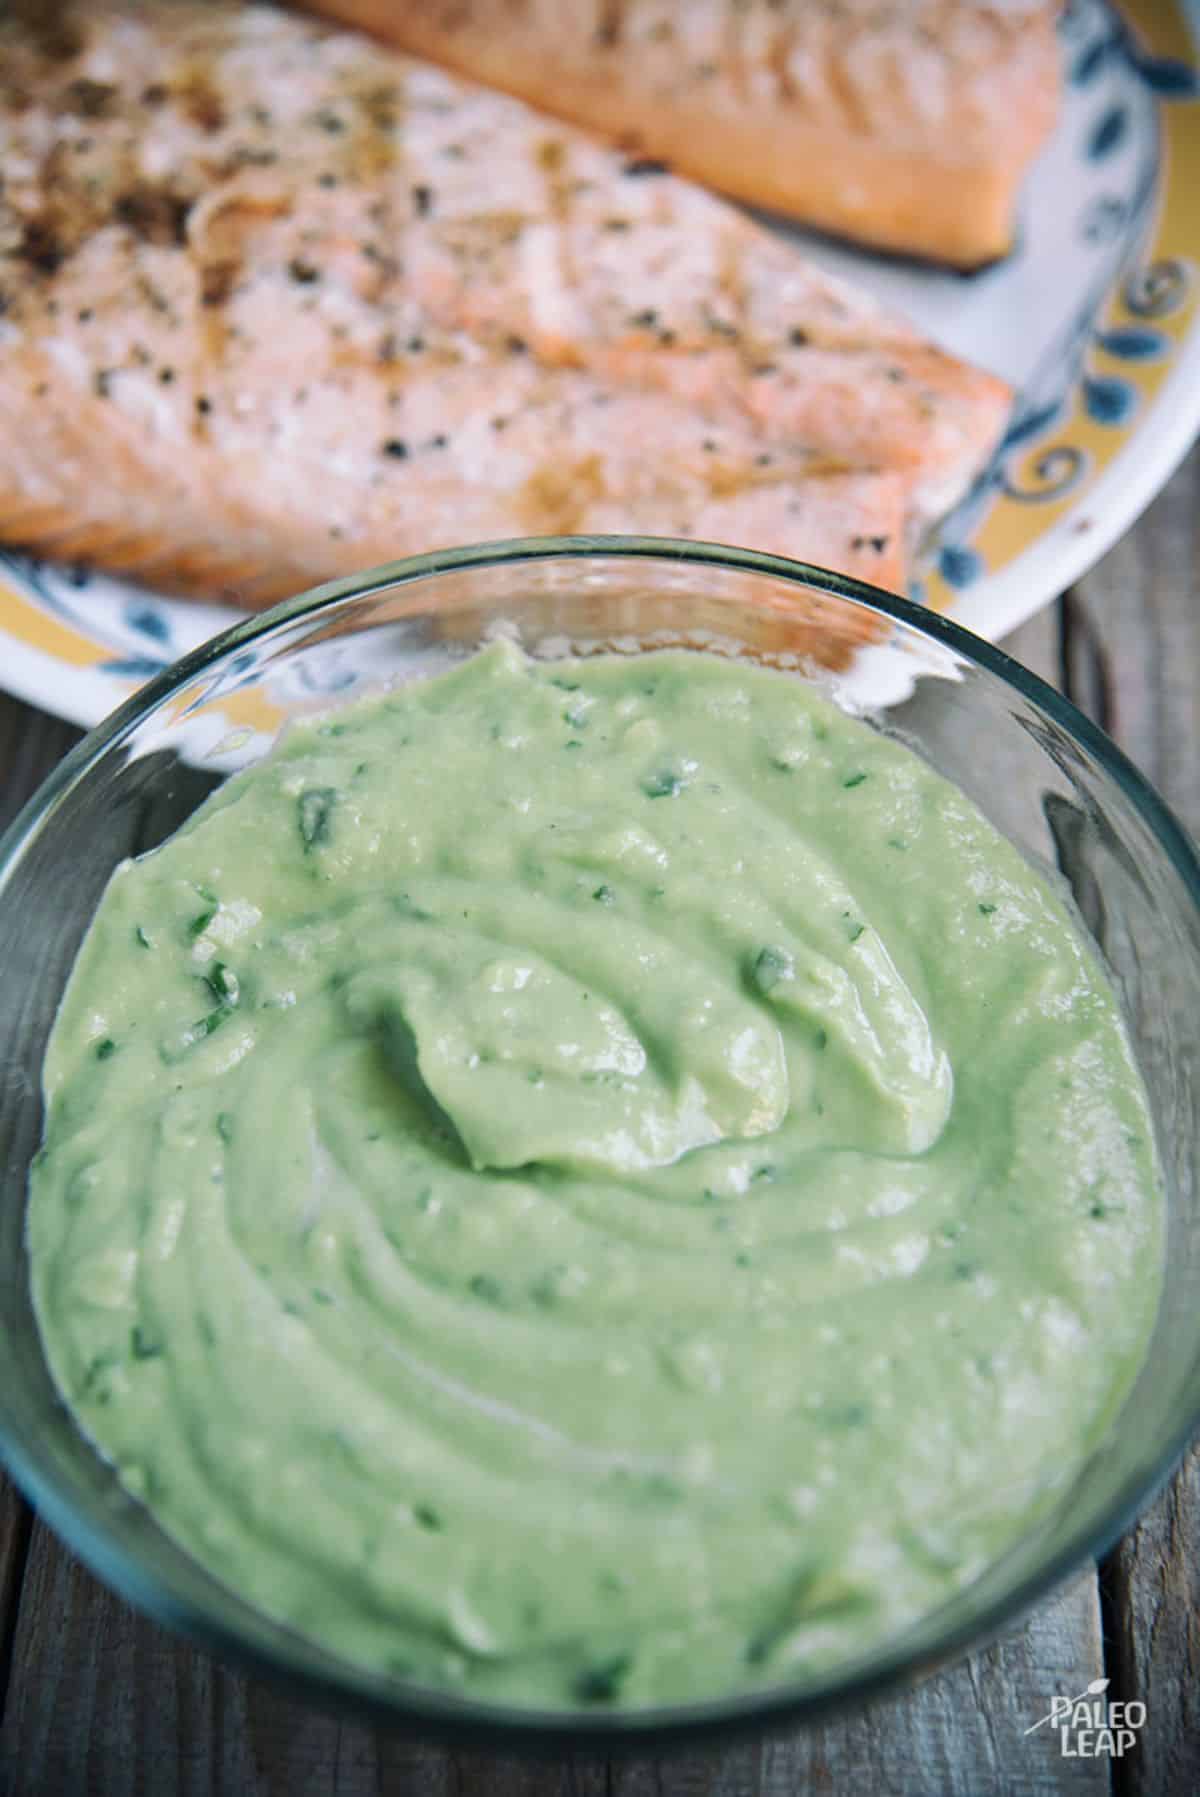 Grilled Salmon With Avocado-Coconut Sauce Recipe Preparation